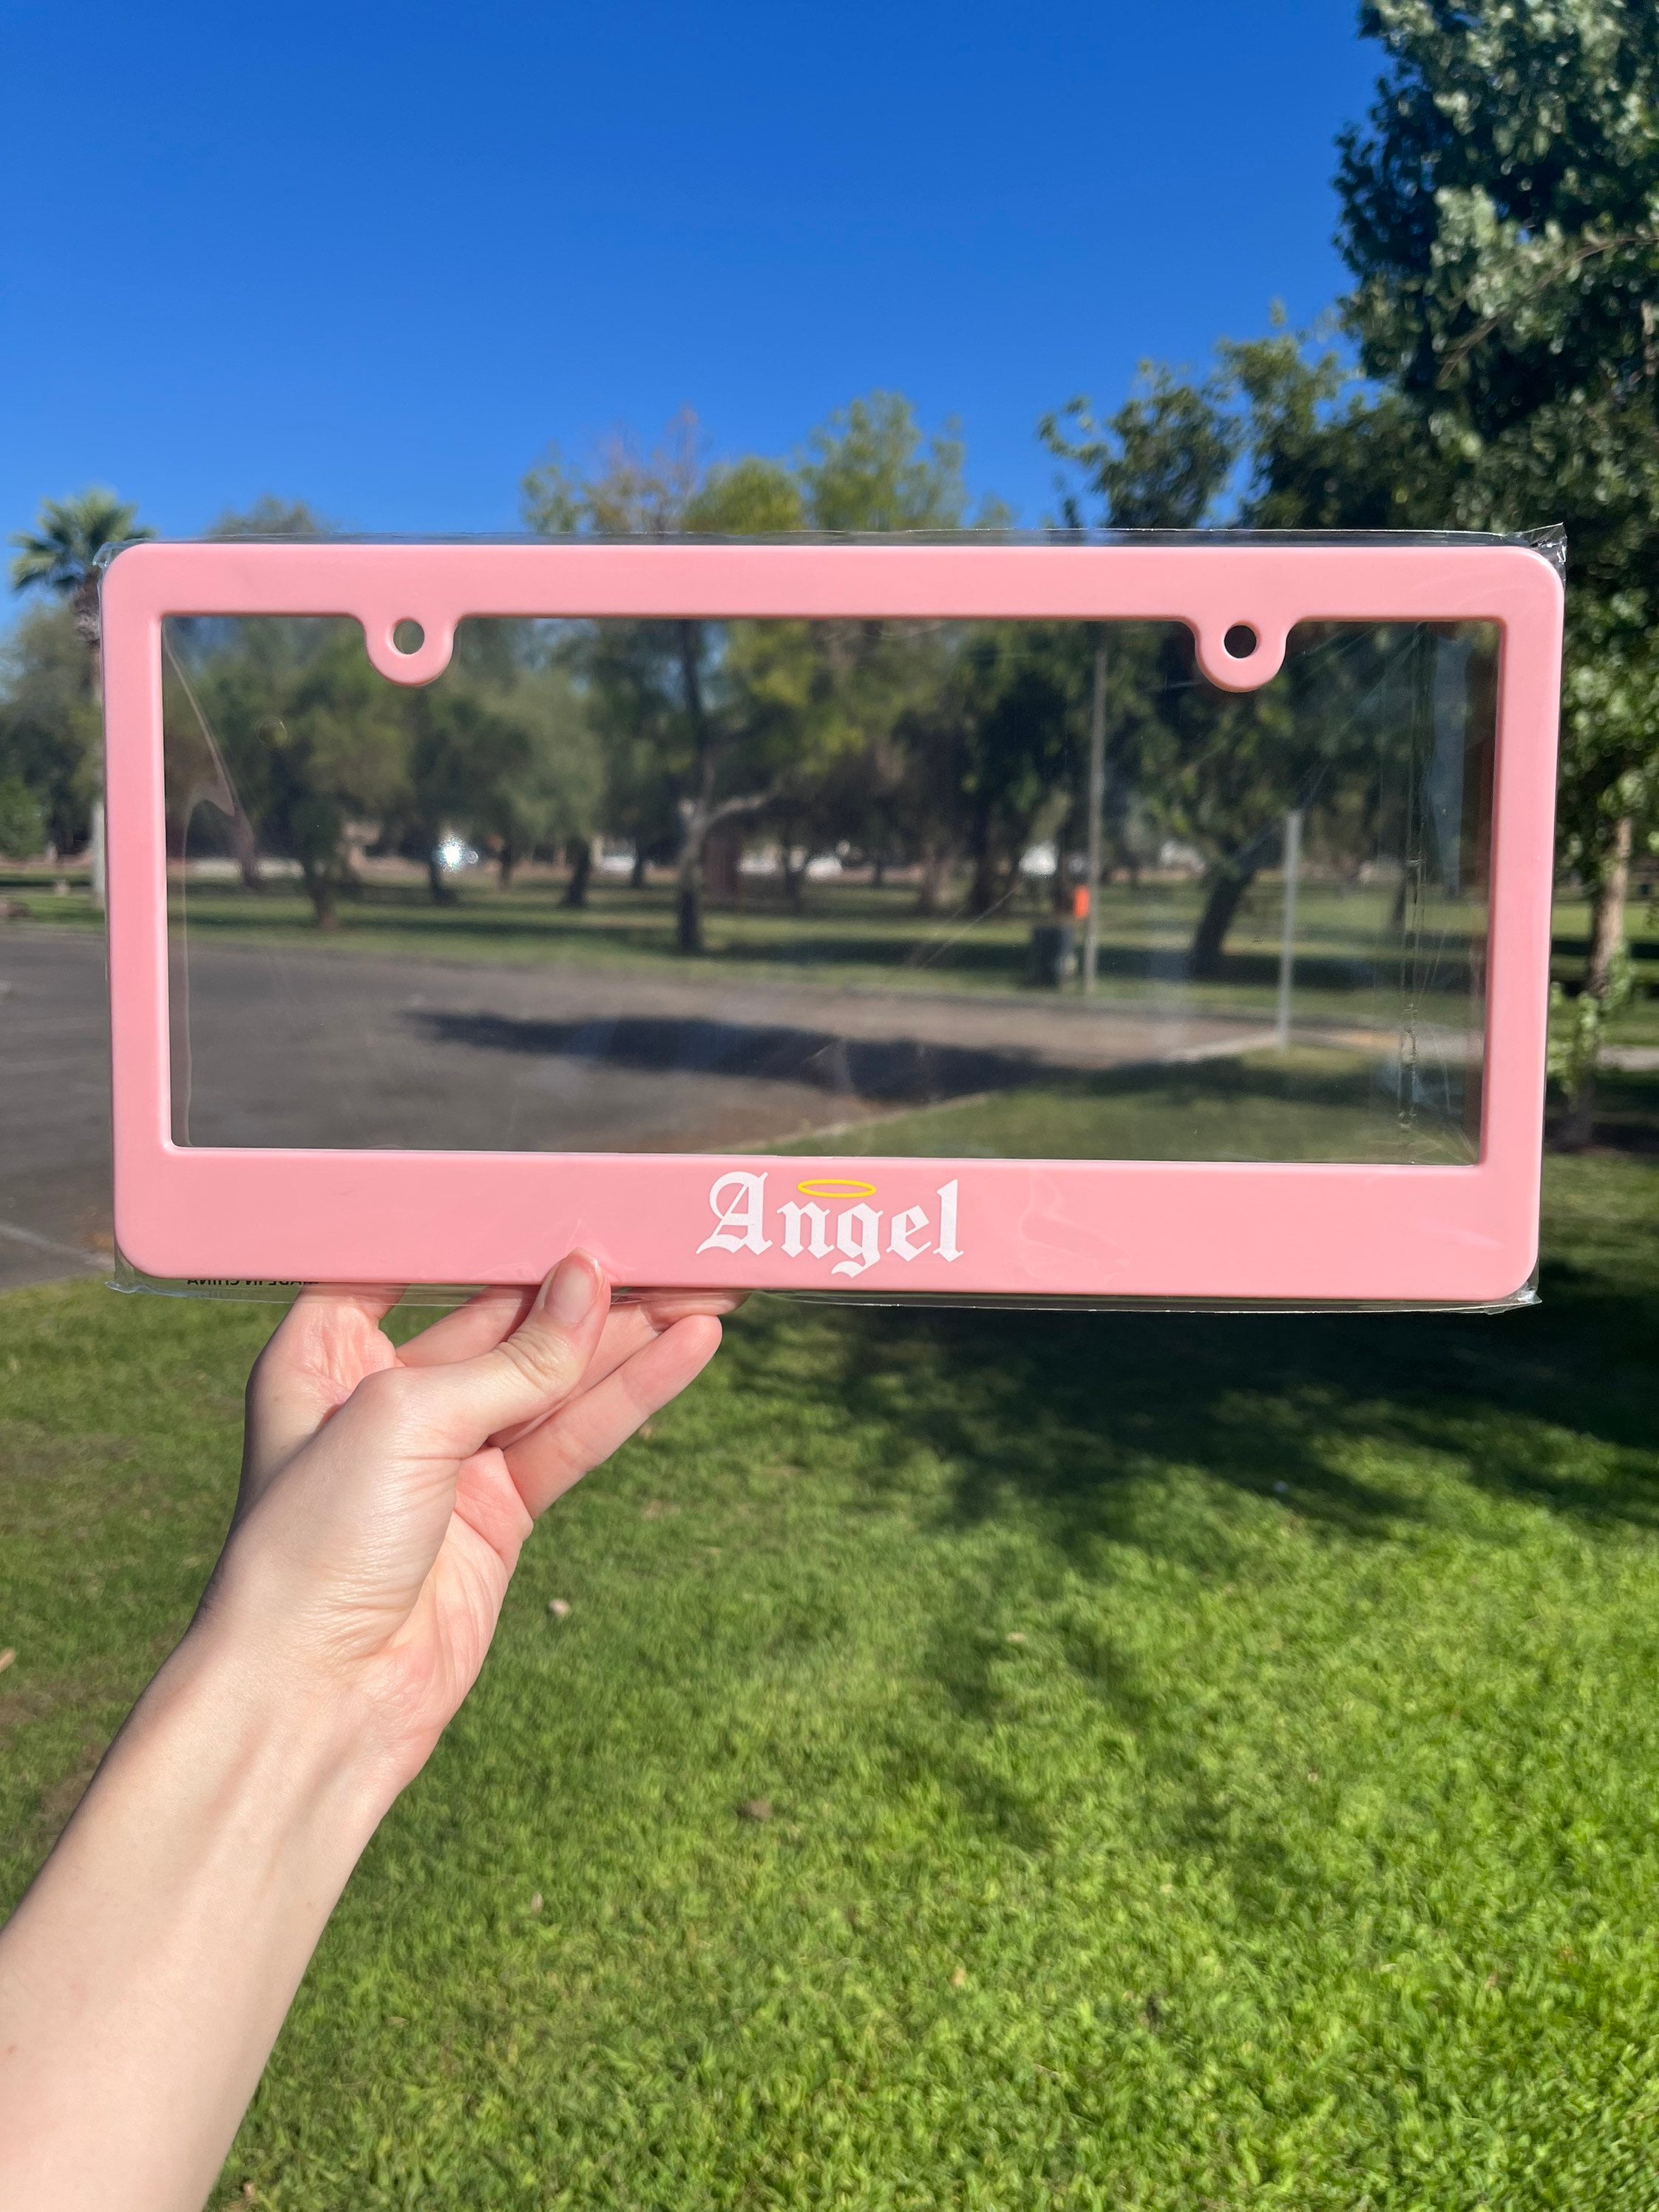 Checkered License Plate Frame, Y2K Car Accessories, Retro License Plate  Covers, Pink & Blue Vanity Car Tag Holder for Women, Gifts for Teens 